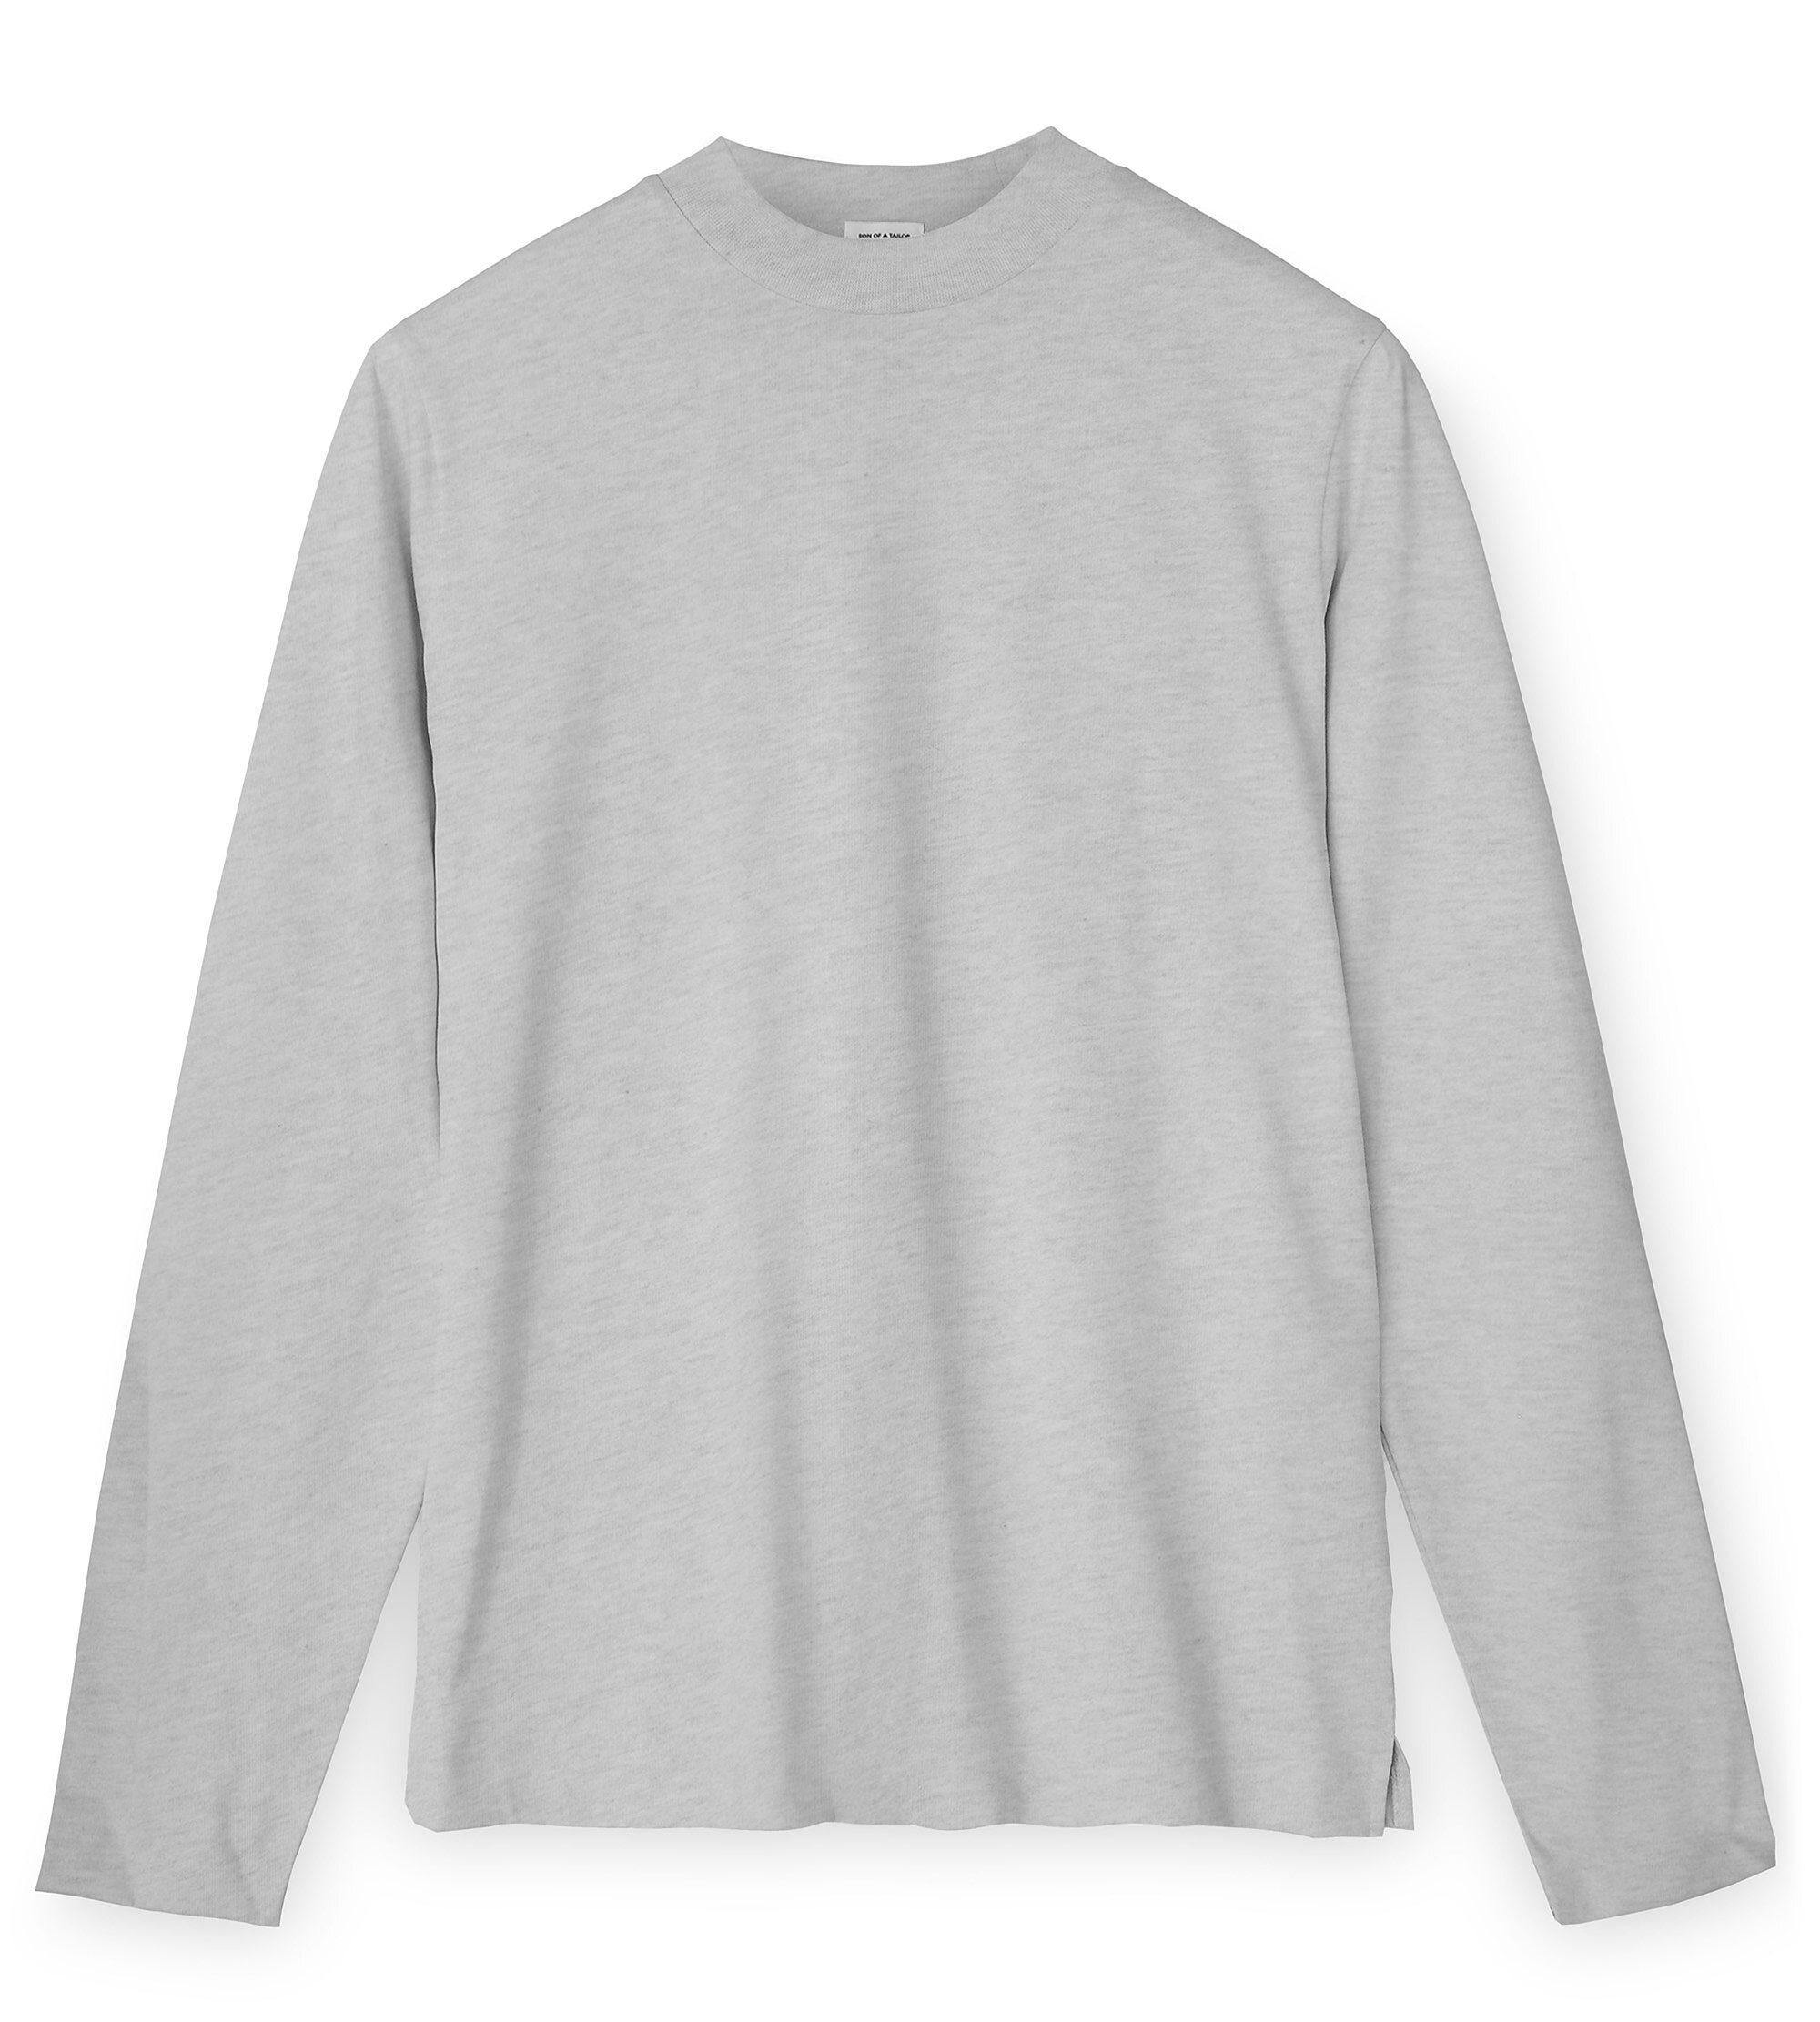 Custom Fitted Cotton Hi-Neck / Long-Sleeve Light Grey | Son of a Tailor